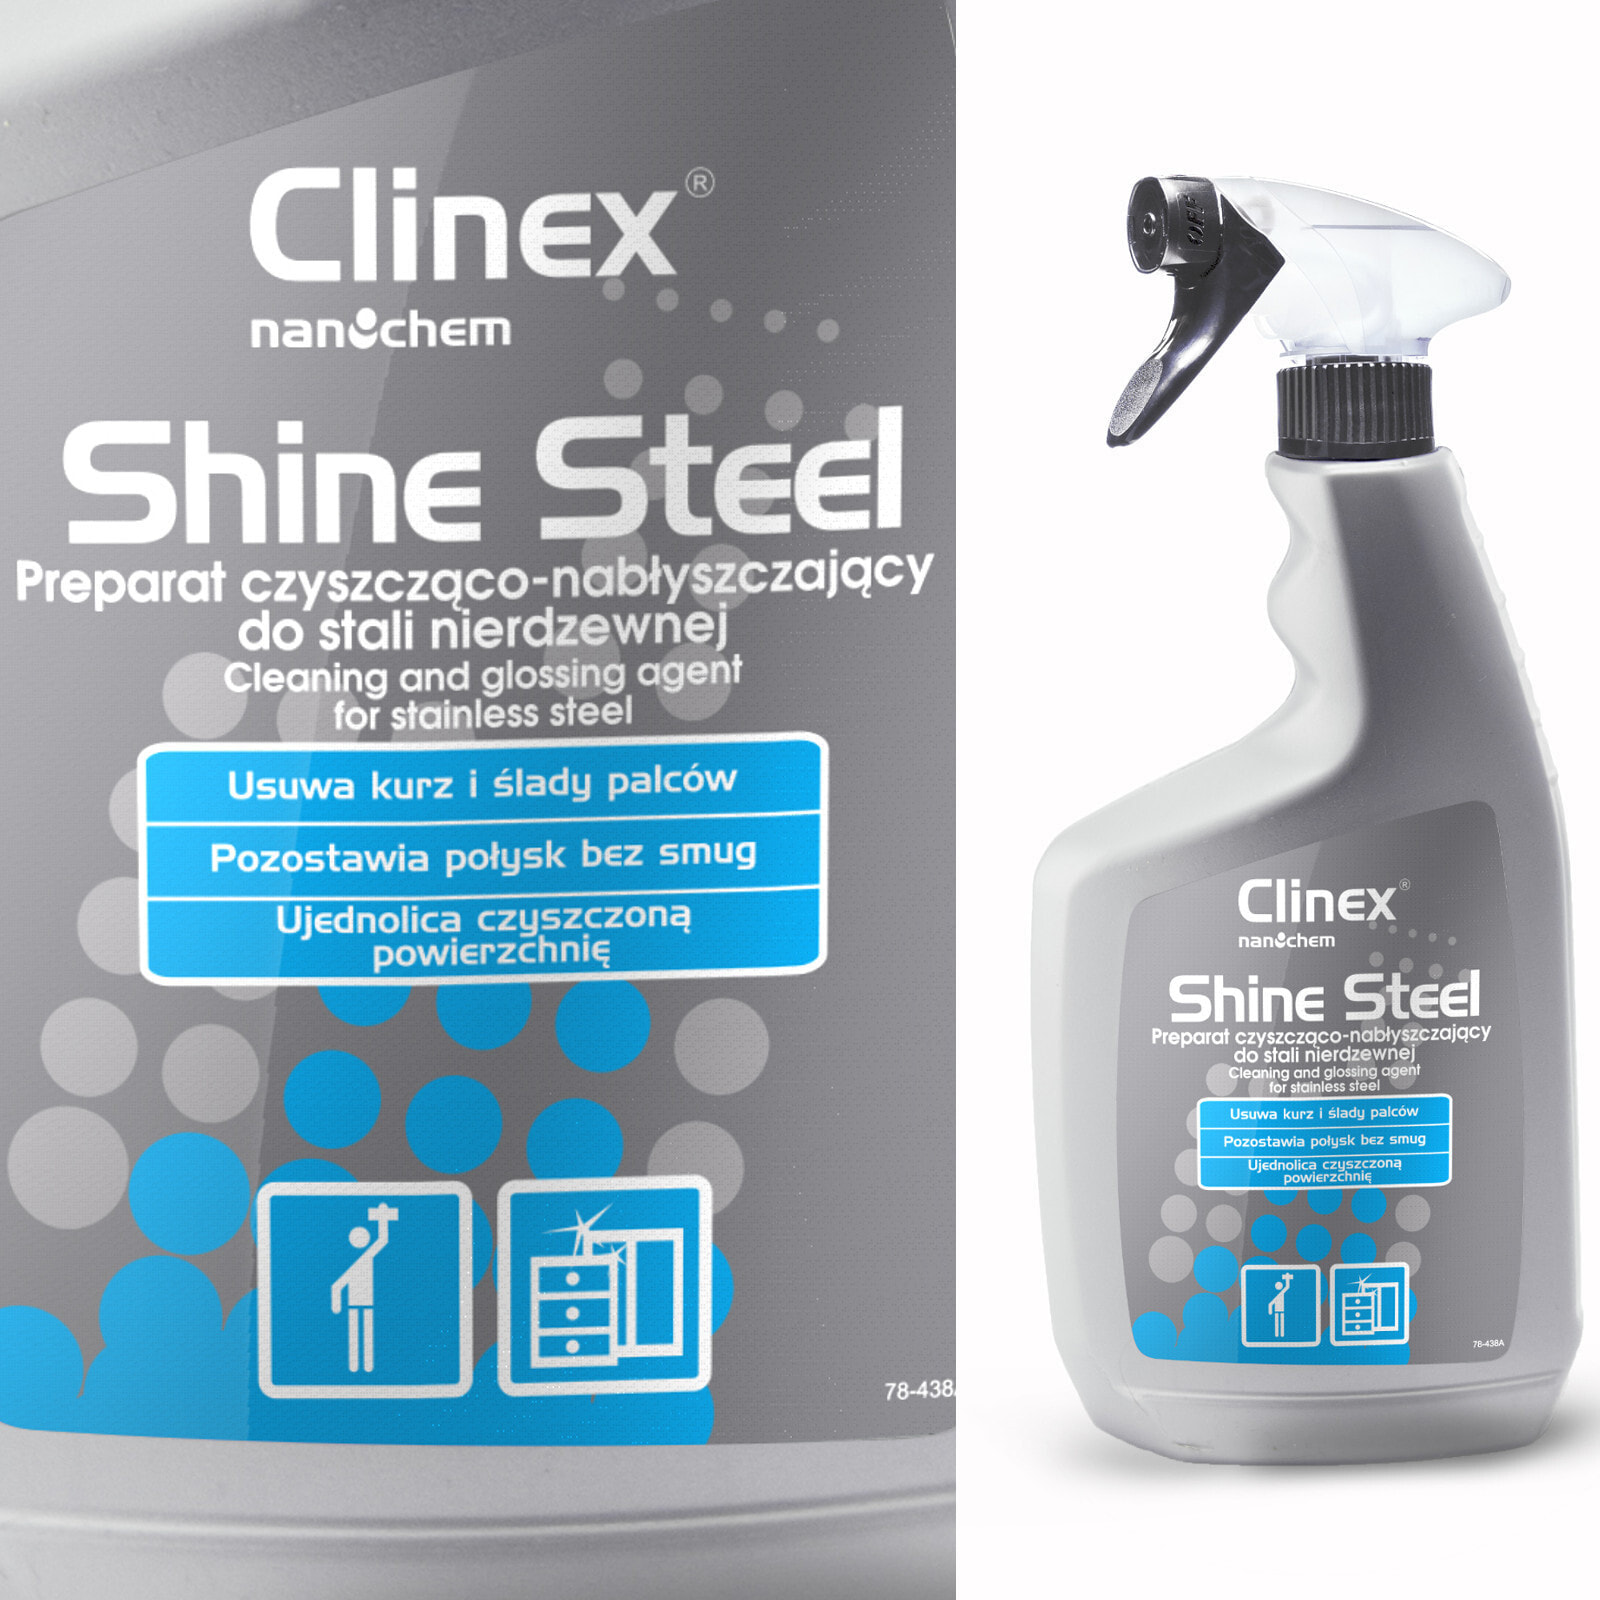 Product for cleaning and polishing furniture and devices made of stainless steel CLINEX Shine Steel 650ML